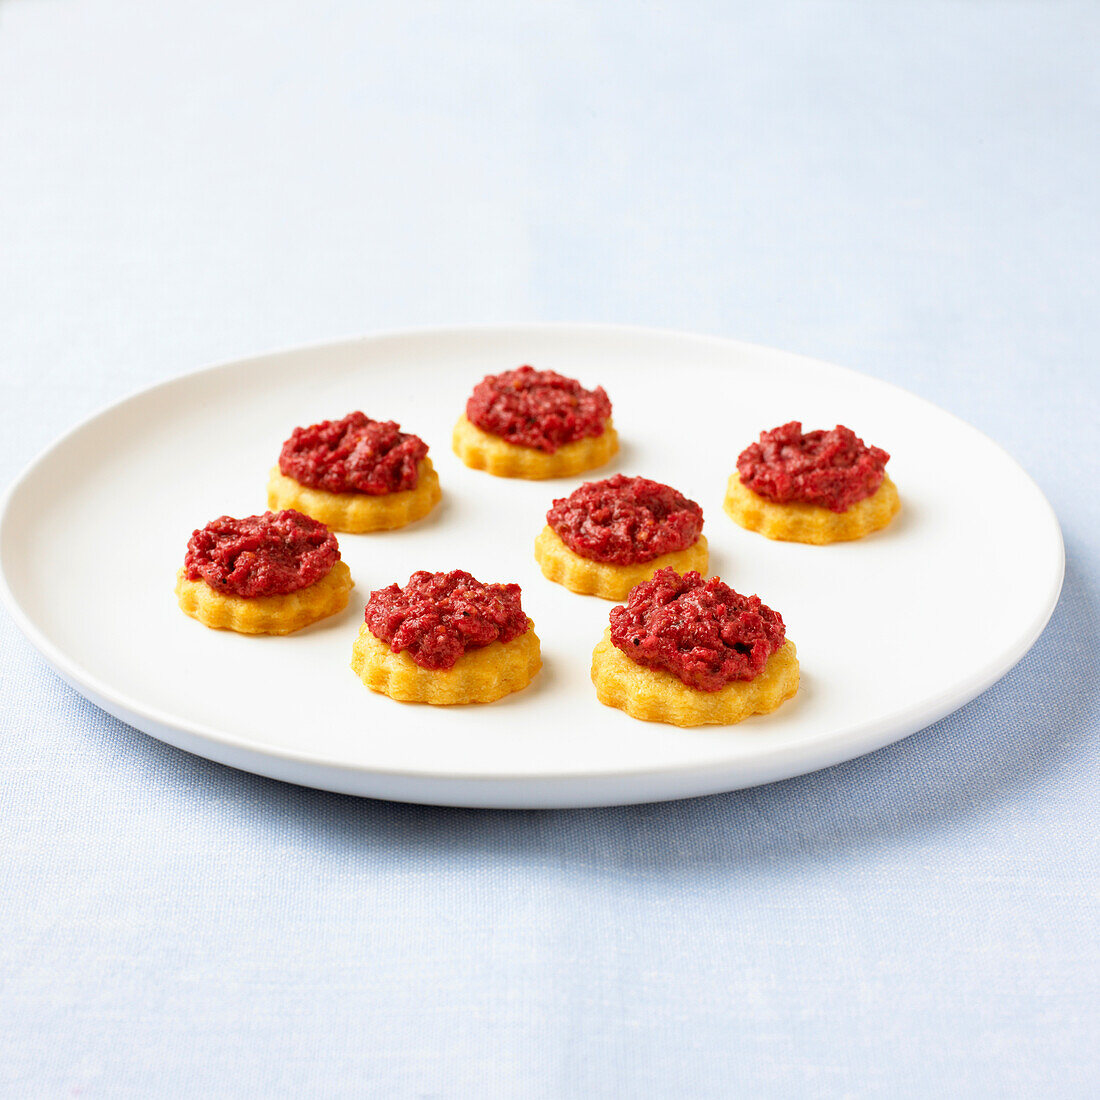 Parmesan shortbread topped with beetroot